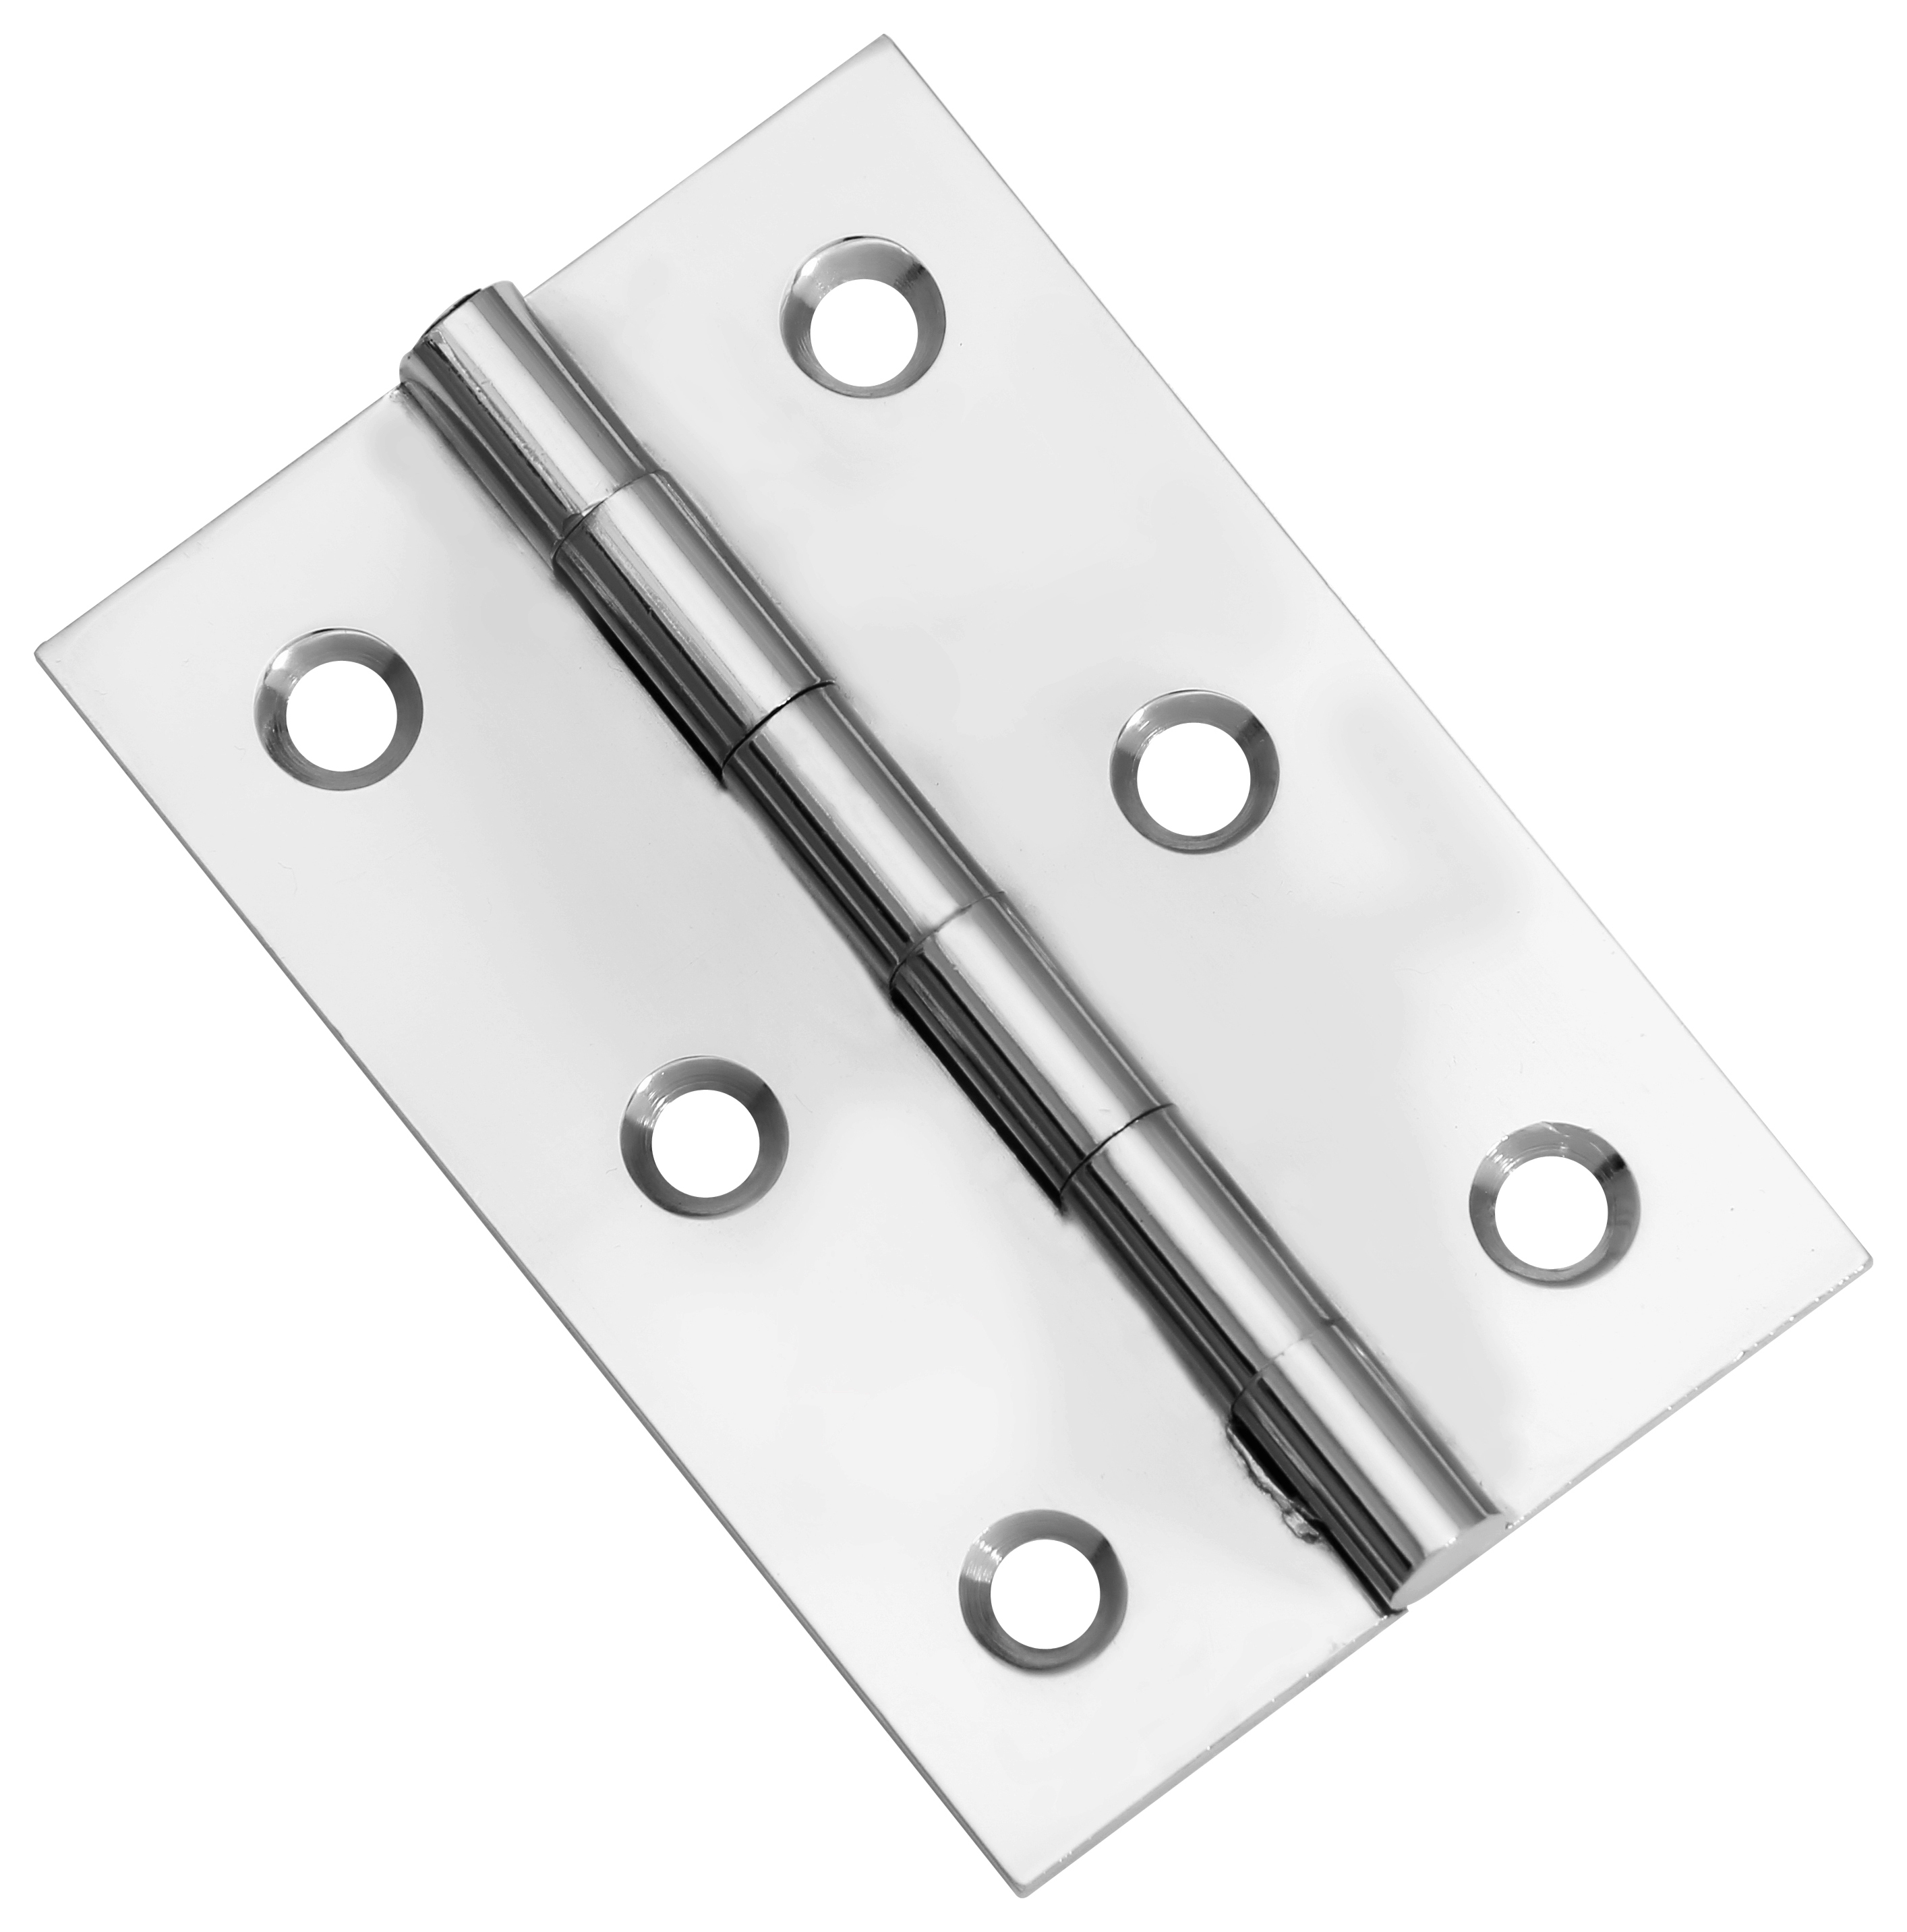 Image of Wickes Solid Brass Polished Chrome Butt Hinge 76mm - Pack of 2